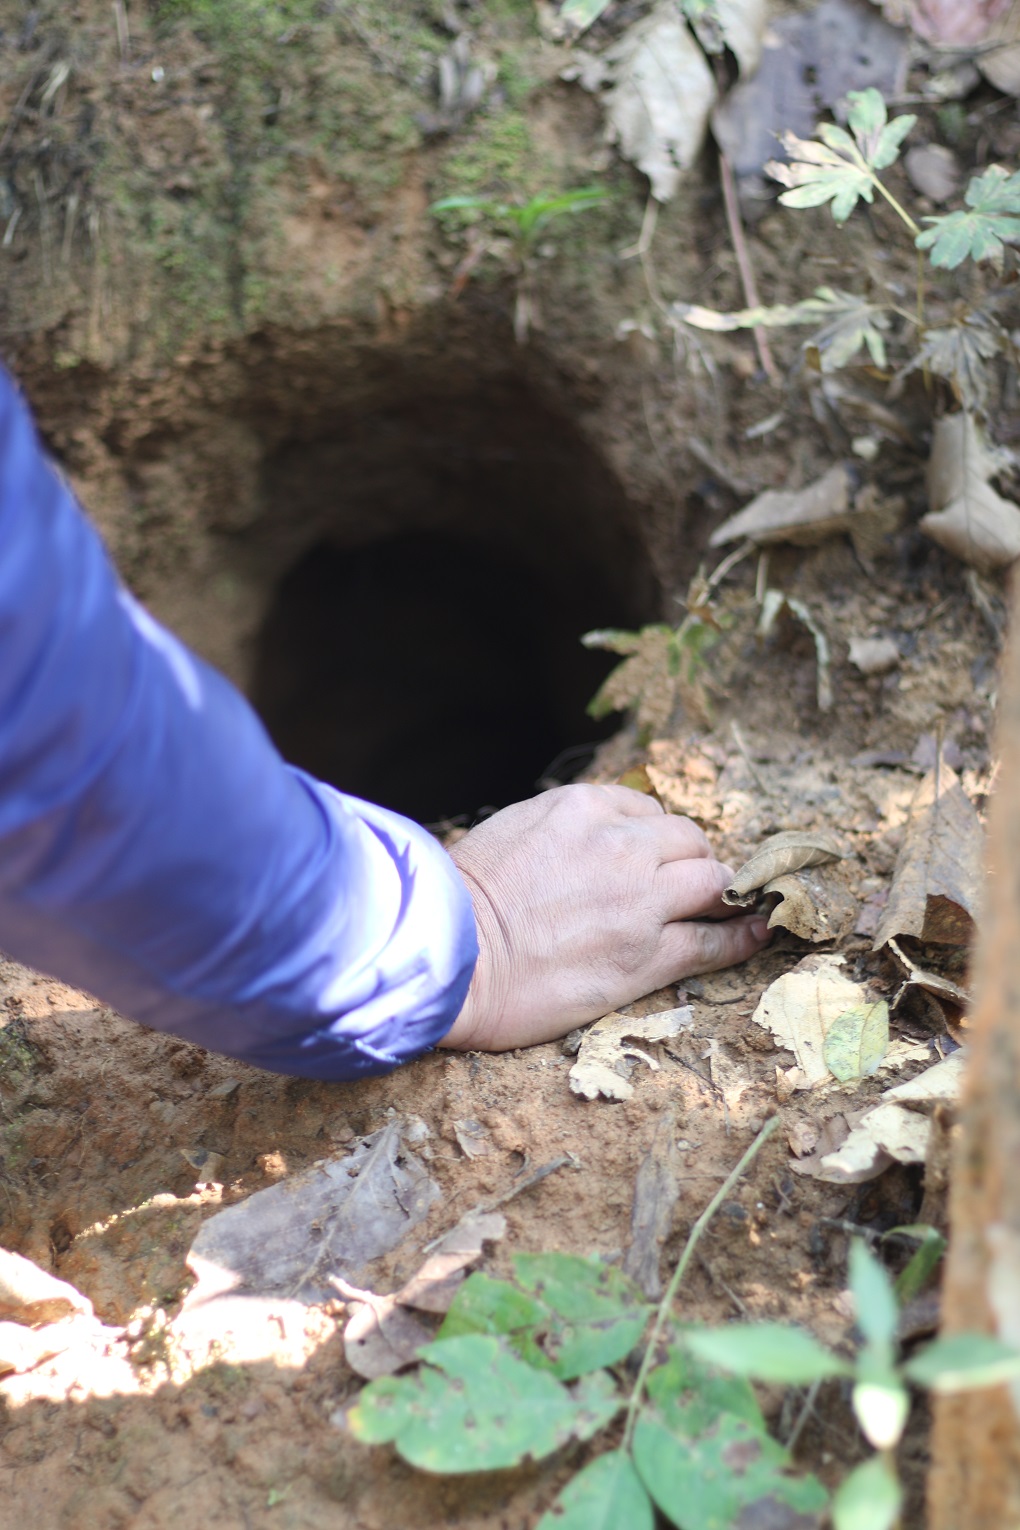 pangolin burrows which are used to detect presence of the shy mammal